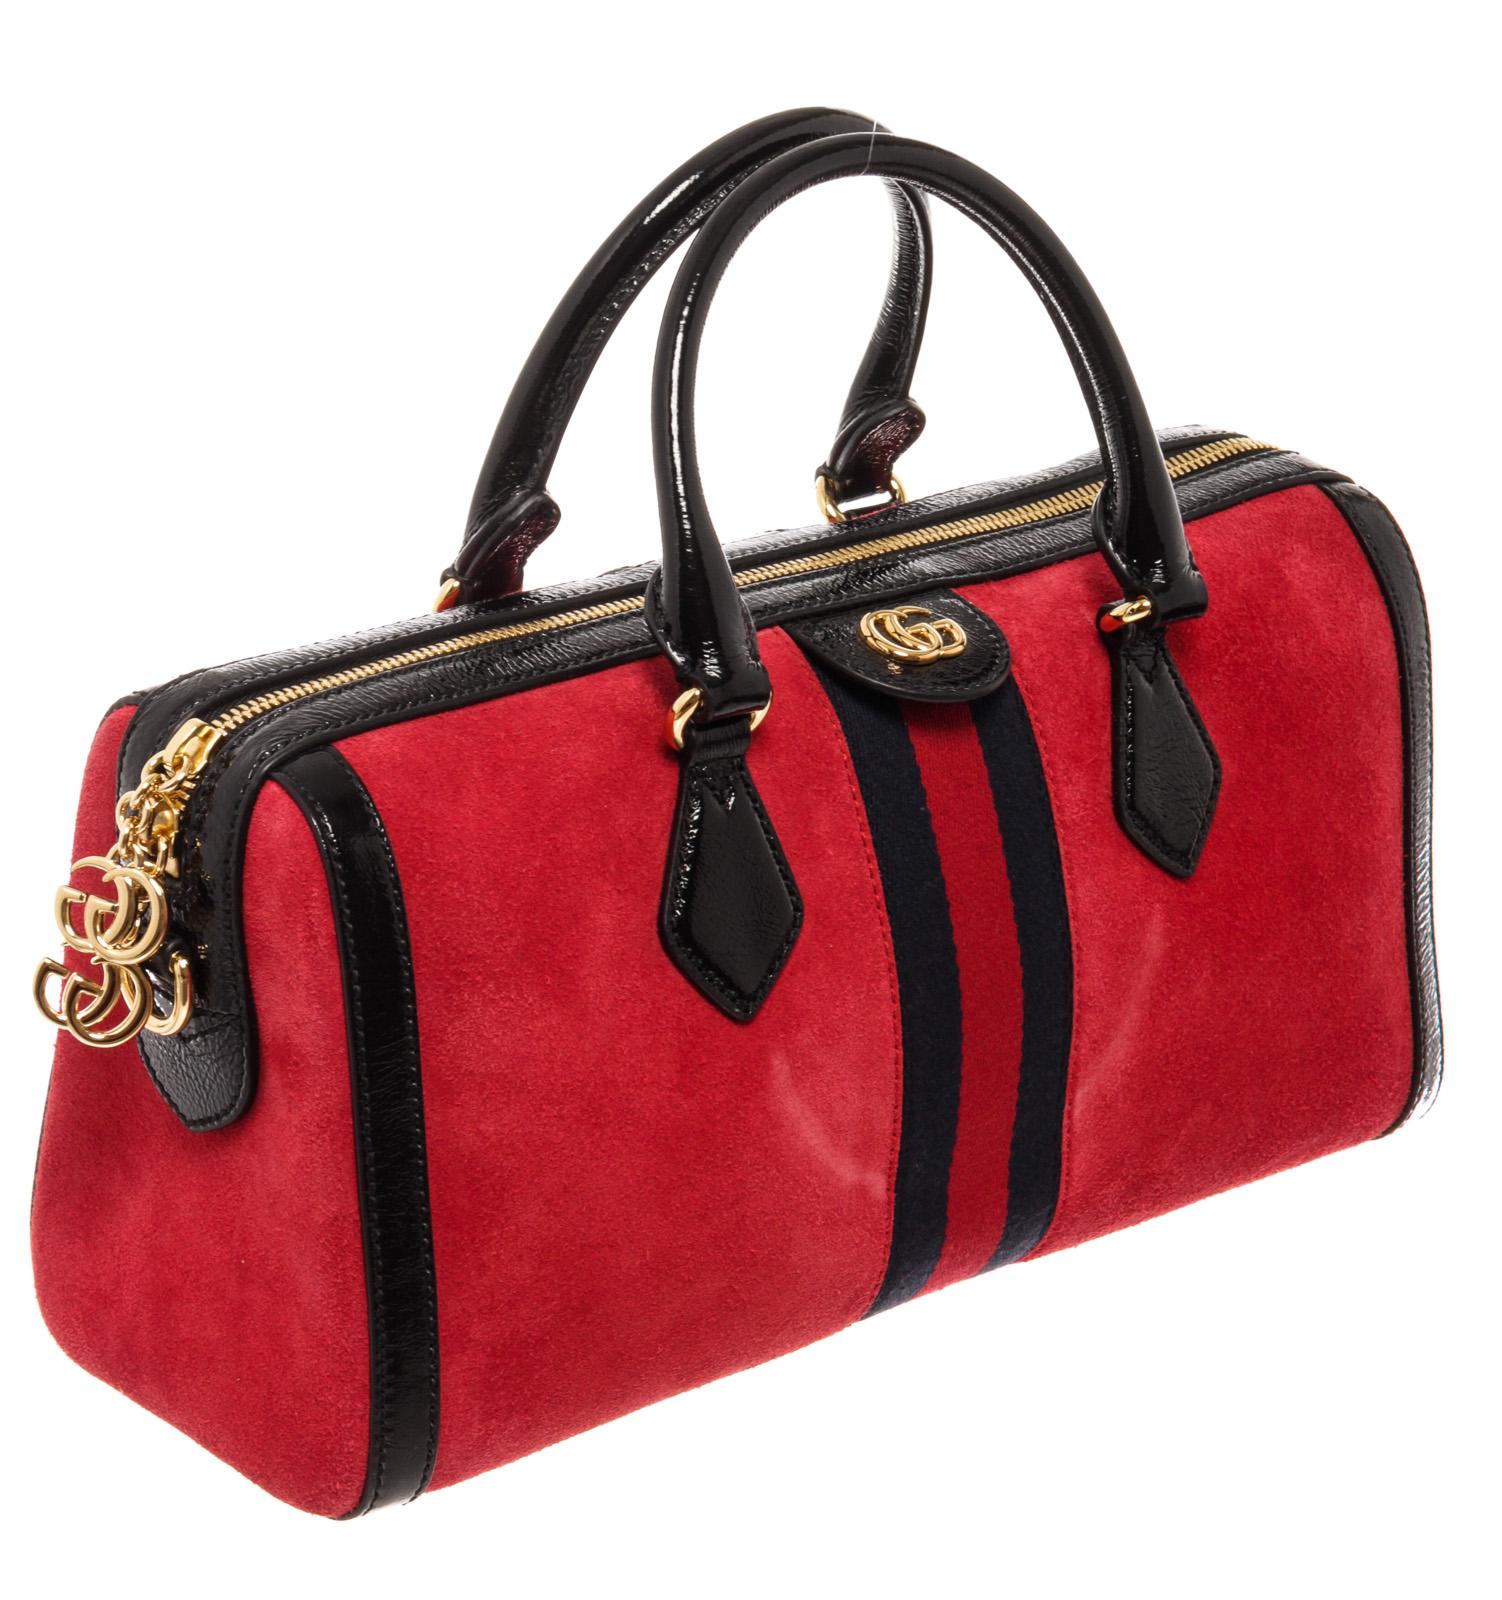 Gucci Ophidia Medium Boston bag with red suede leather and black patent leather trim, dual rolled top handles and detachable shoulder strap, gold-tone hardware, blue and red Web signature stripes around the bag, GG detailing on the front, upper